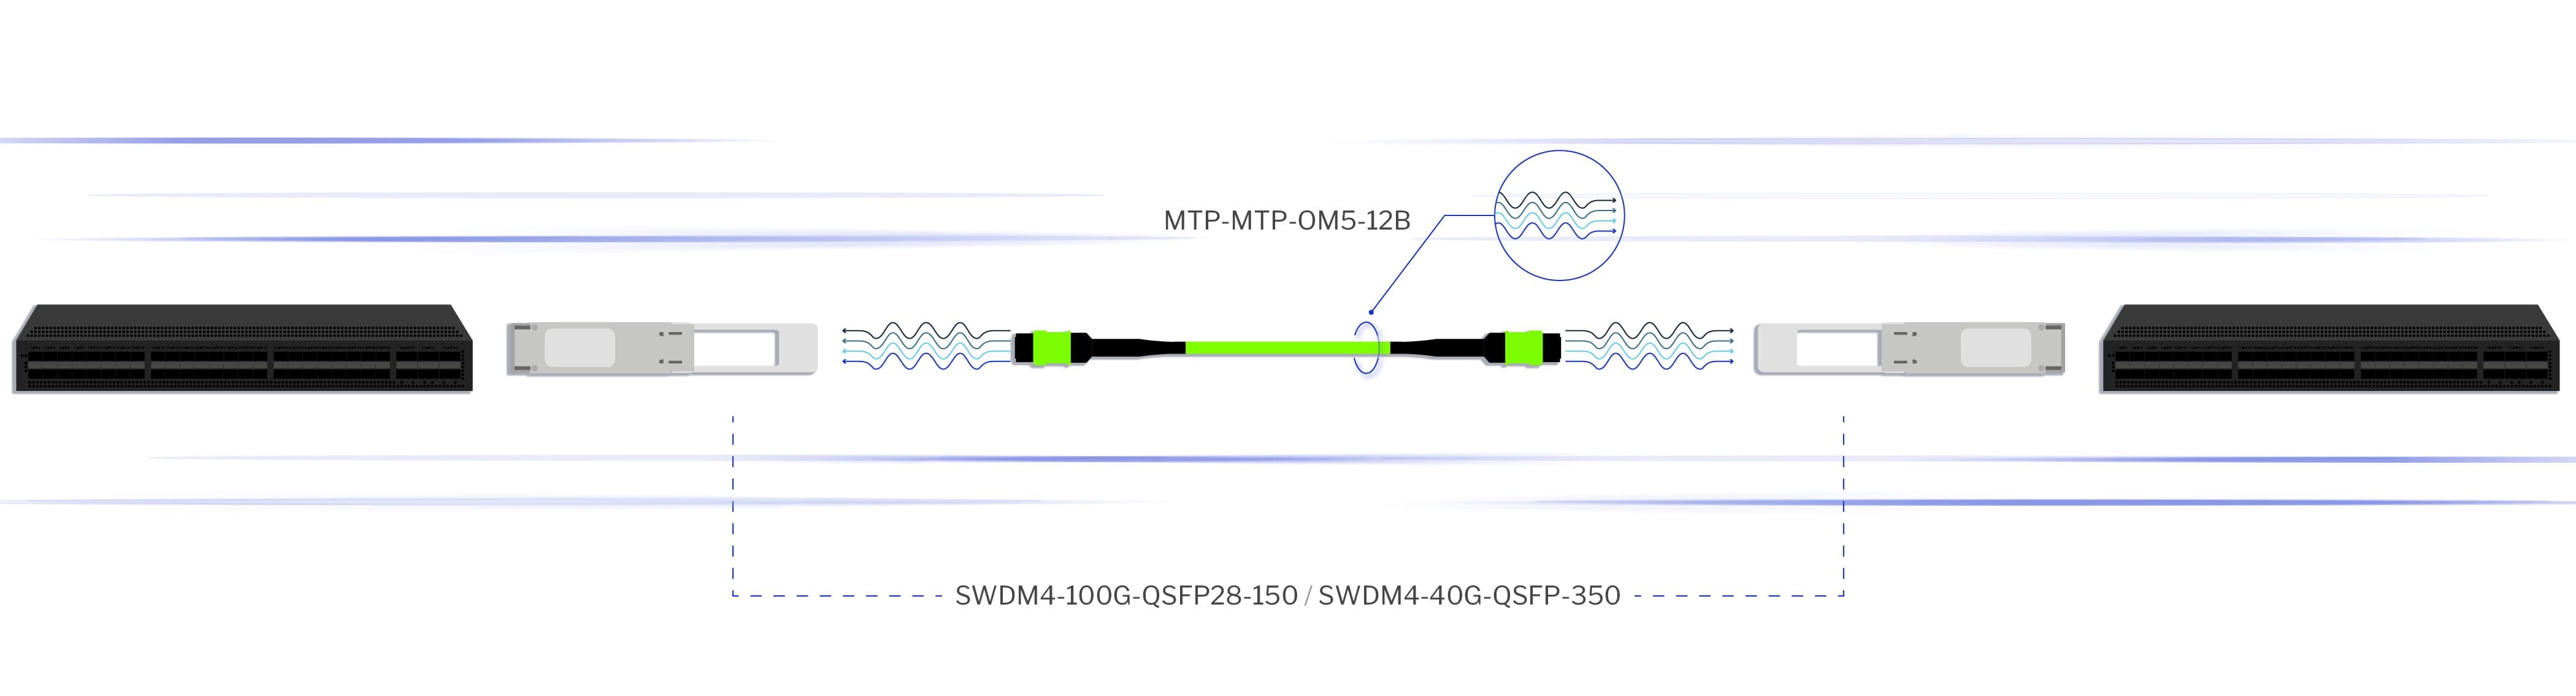 MTP-MTP-OM5-12B Cable Patch Connectivity Solution